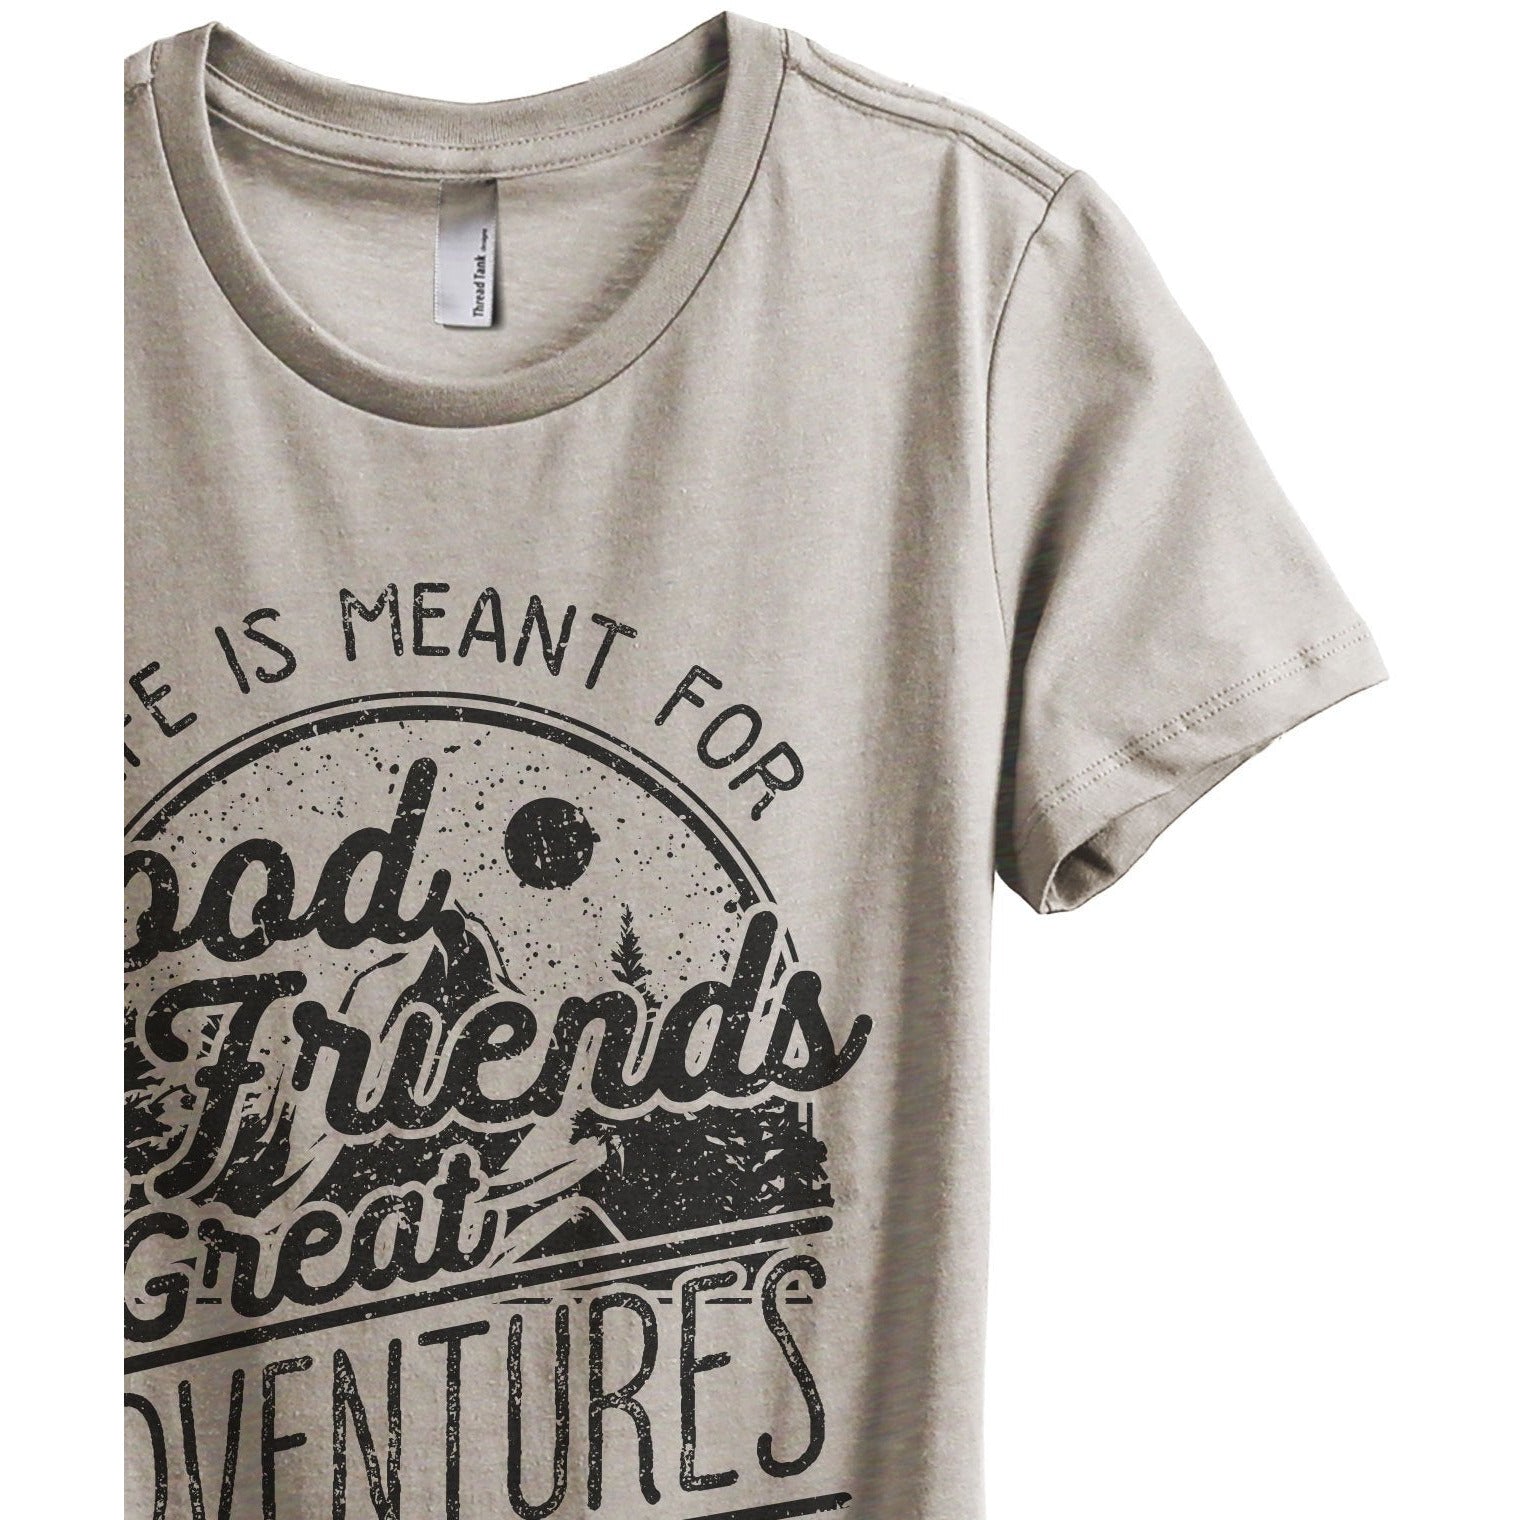 Good Friends And Great Adventures Women's Relaxed Crewneck T-Shirt Top Tee Heather Tan Zoom Details
